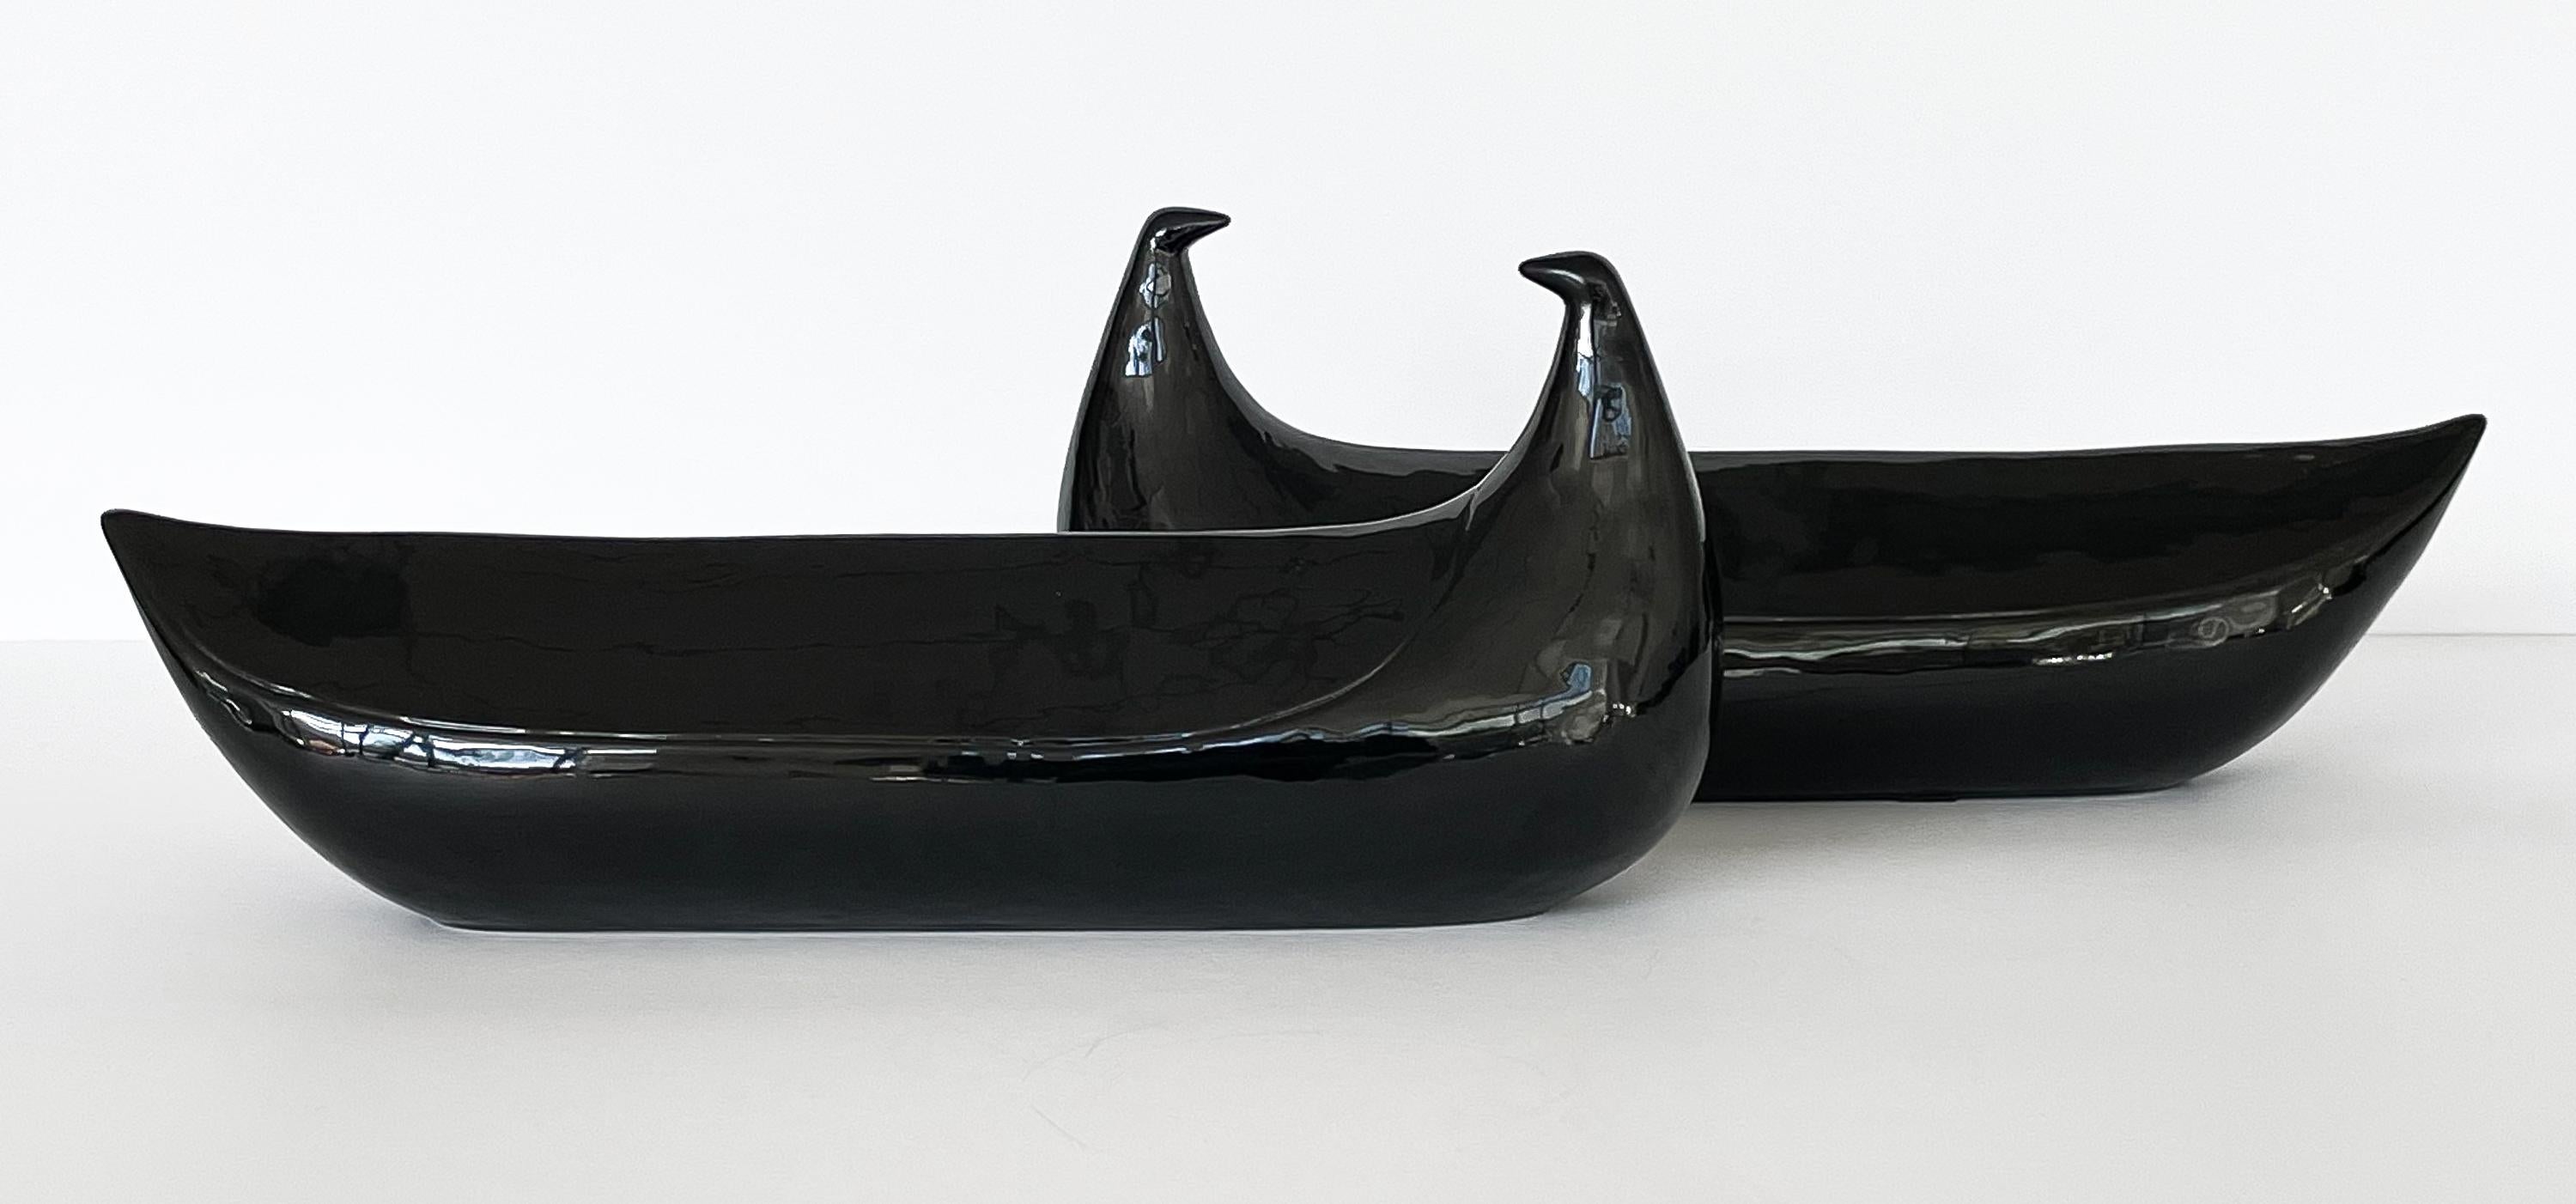 Pompeo Pianezolla large black ceramic dove sculptures for Zanolli & Sebellin Nove, Italy circa 1960s. Abstract dove-shaped sculptures in gloss glazed black ceramic. Minimalist and modern in form. Each sculpture is signed by the artist. P.